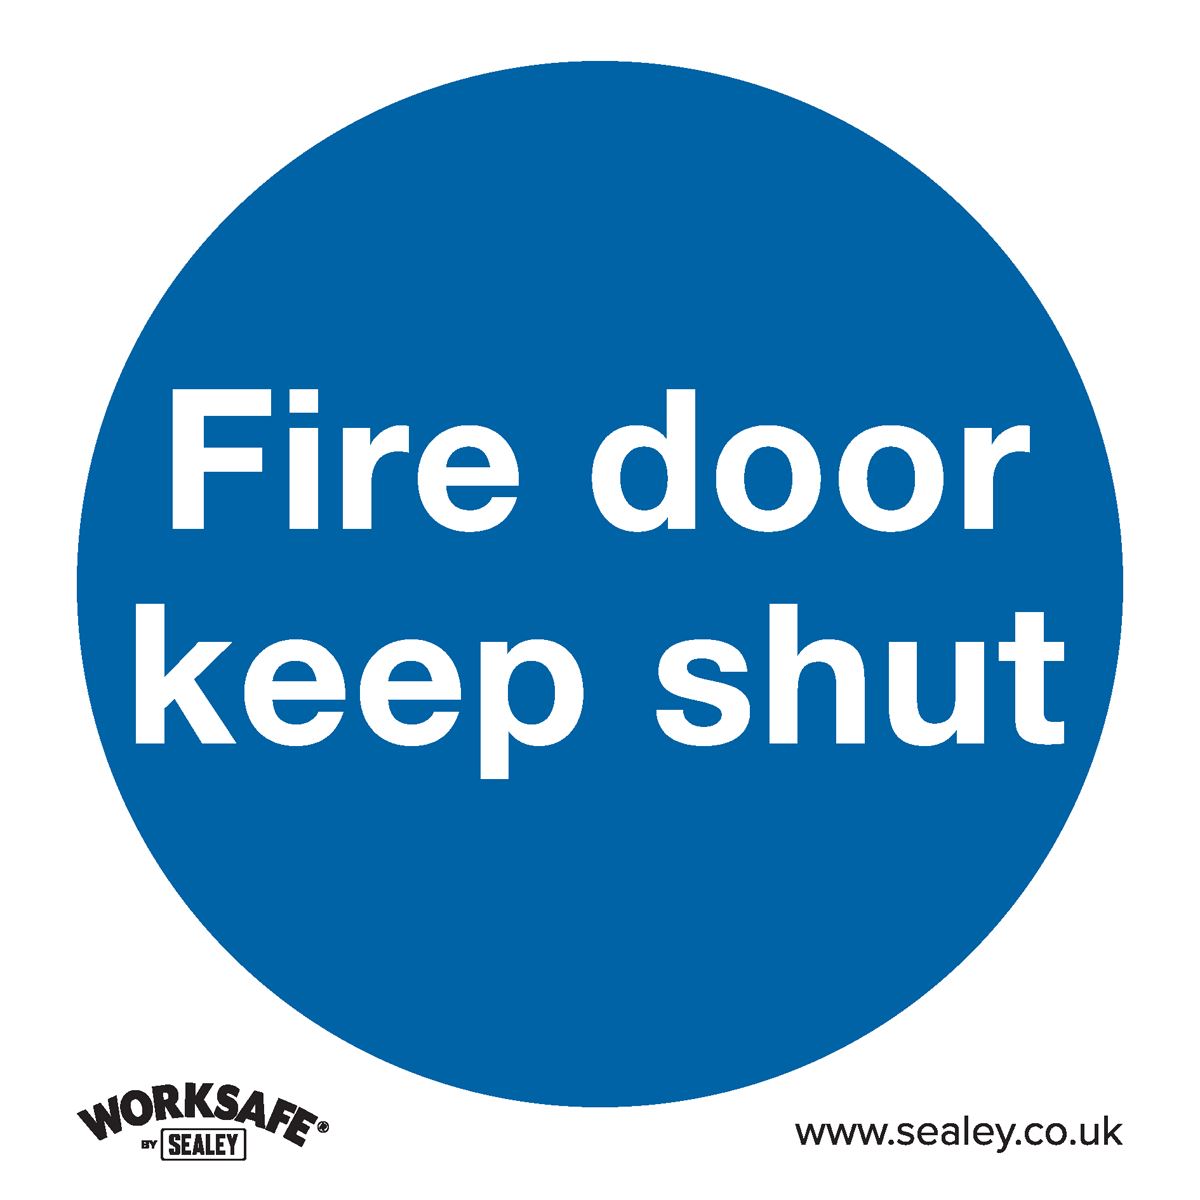 Worksafe by Sealey Mandatory Safety Sign - Fire Door Keep Shut - Rigid Plastic